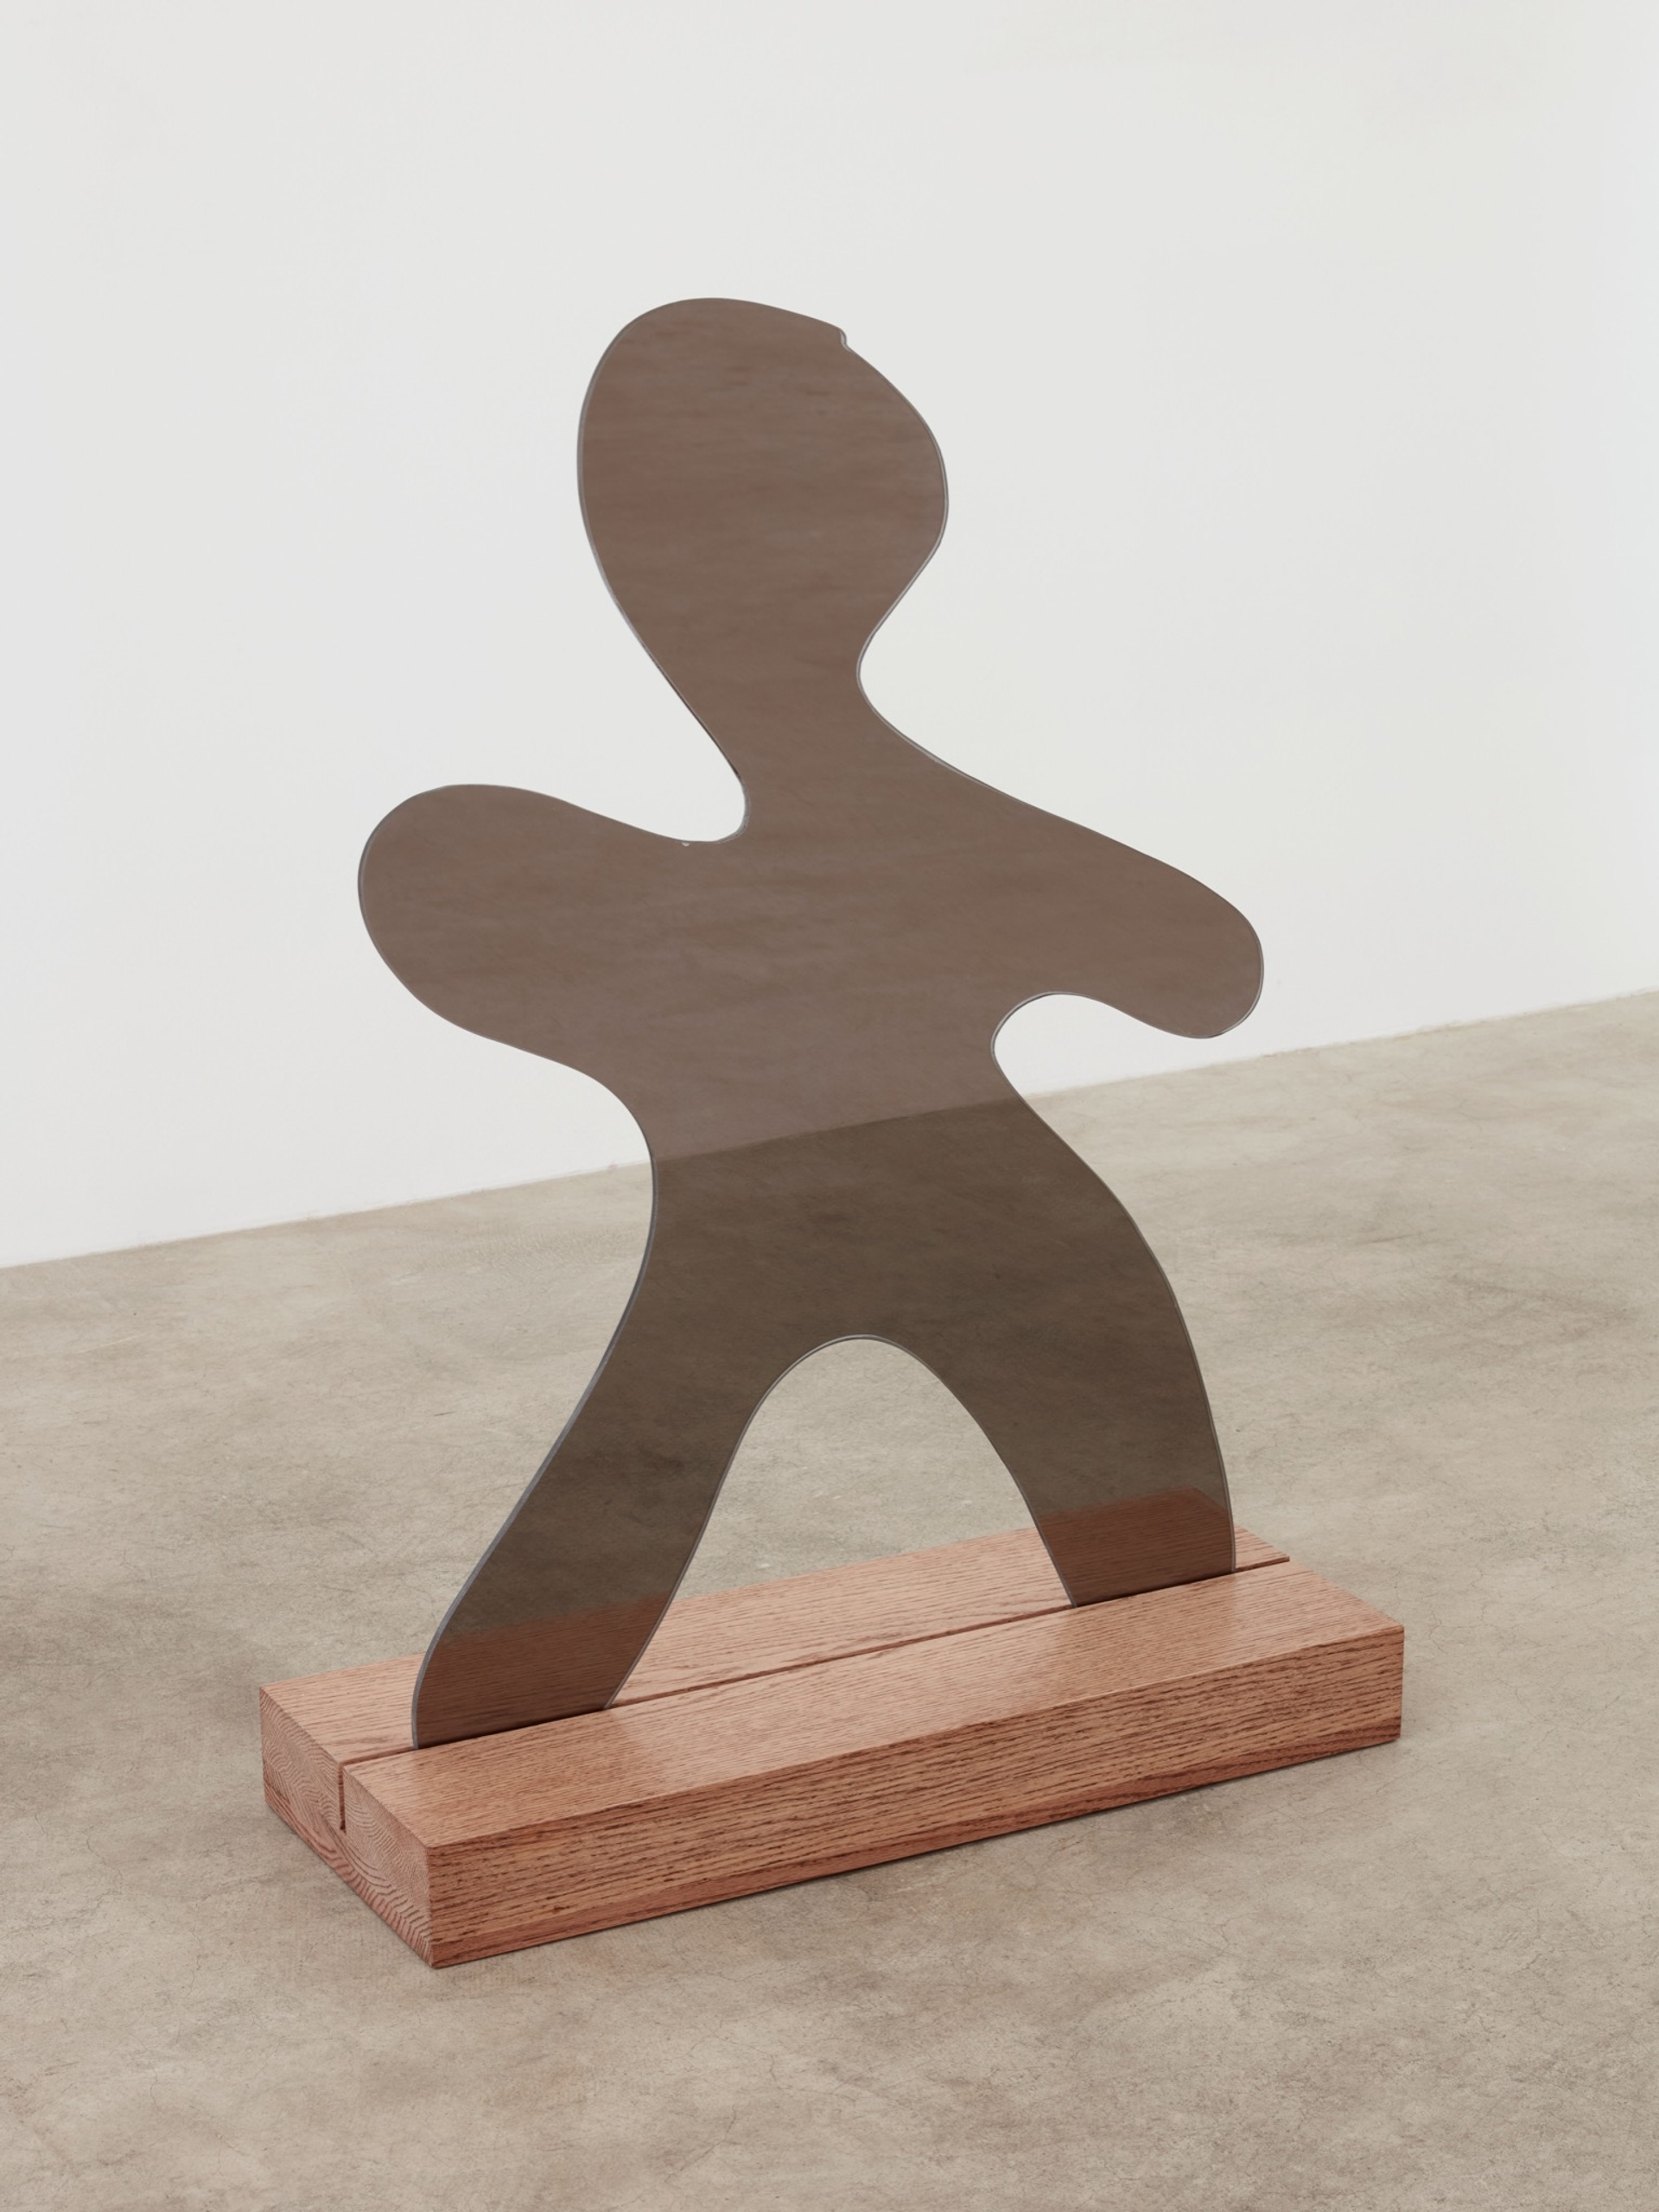 Aria Dean, '(meta)model: after flat stanley,' 2019. Security mirror, oak. Image courtesy the artist and Château Shatto, Los Angeles. Photo: Ed Mumford.